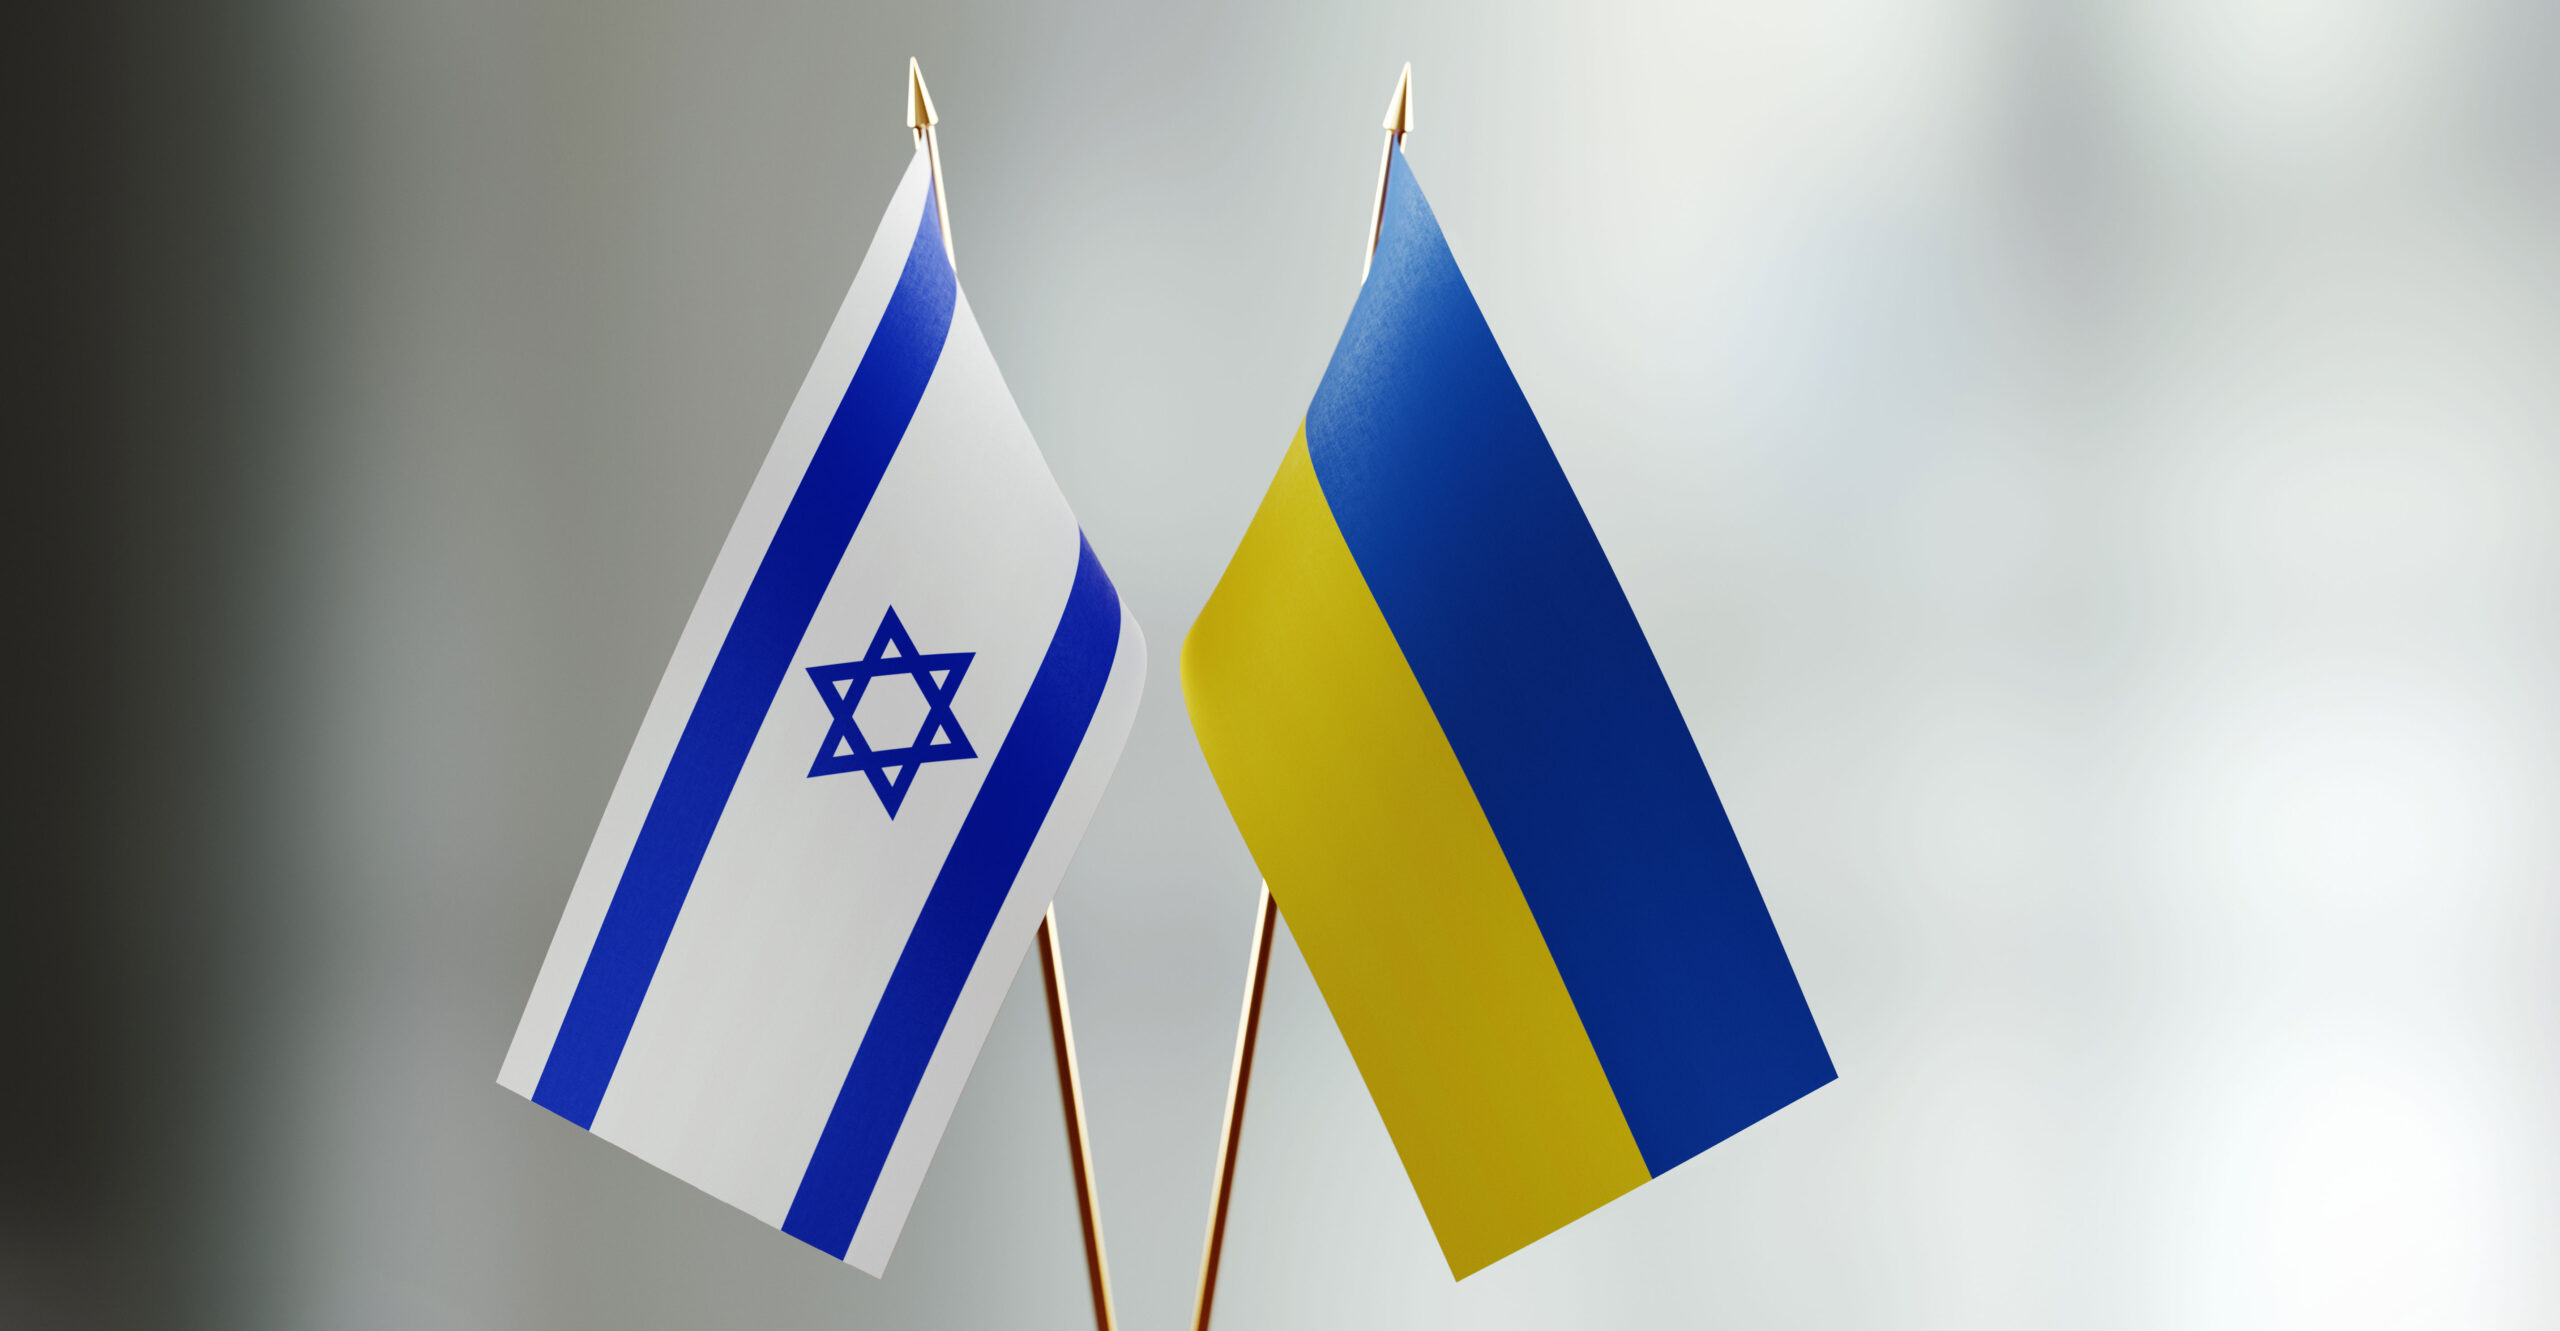 IRRECONCILABLE DIFFERENCES?: Public Opinion Shifts on Ukraine-Russia, Israel-Hamas Wars